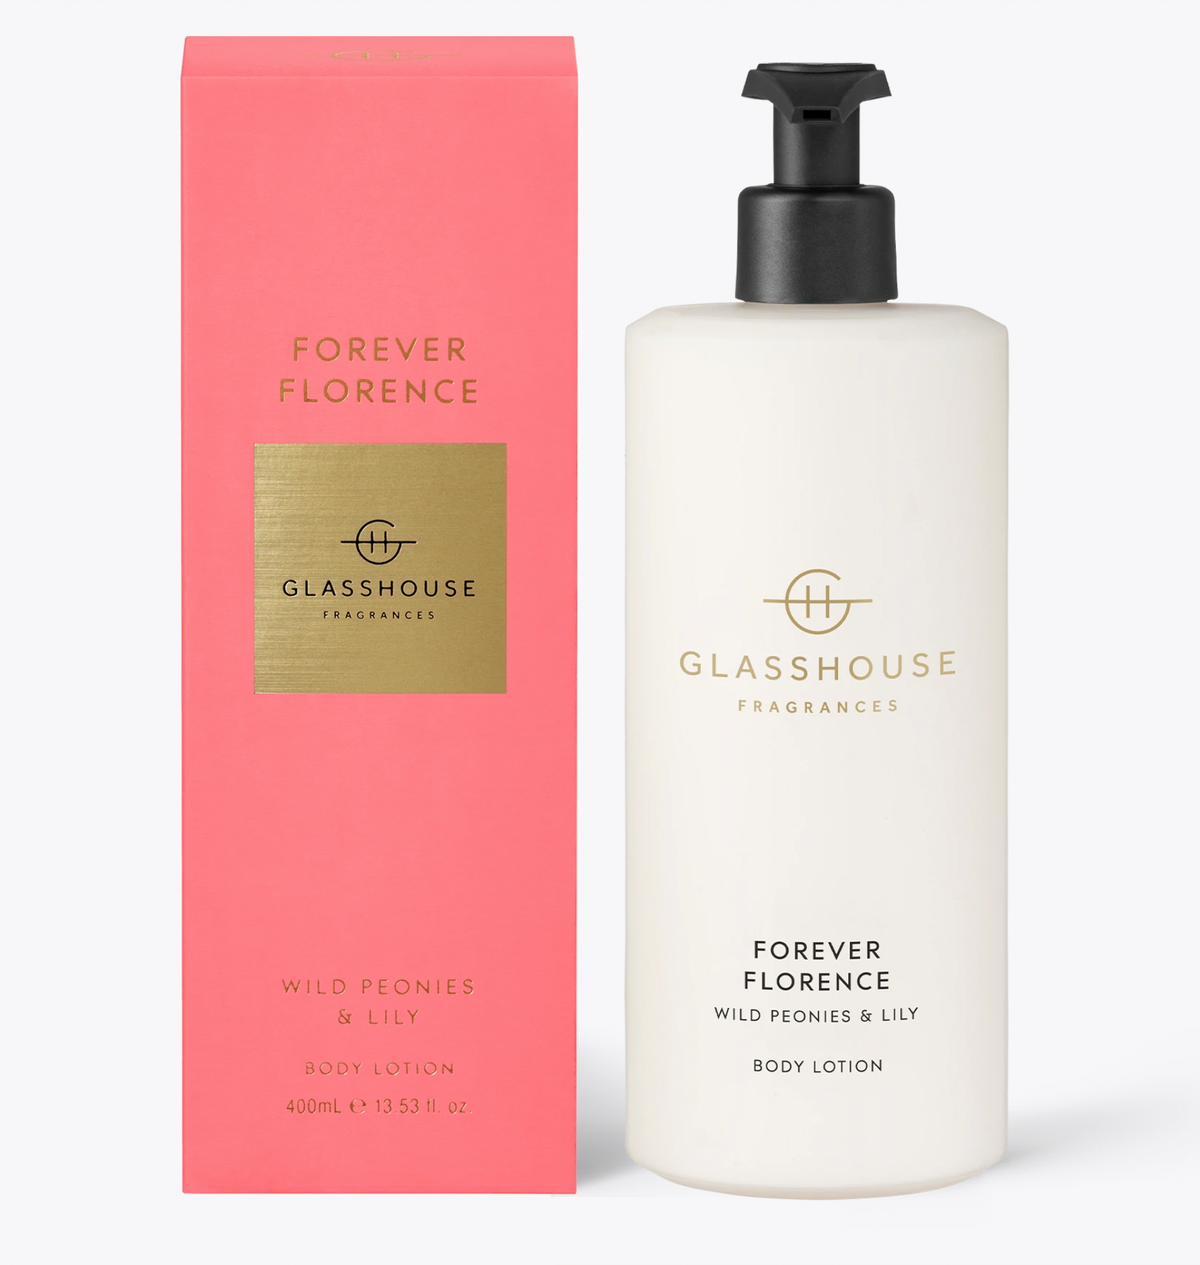 Forever Florence Body Lotion